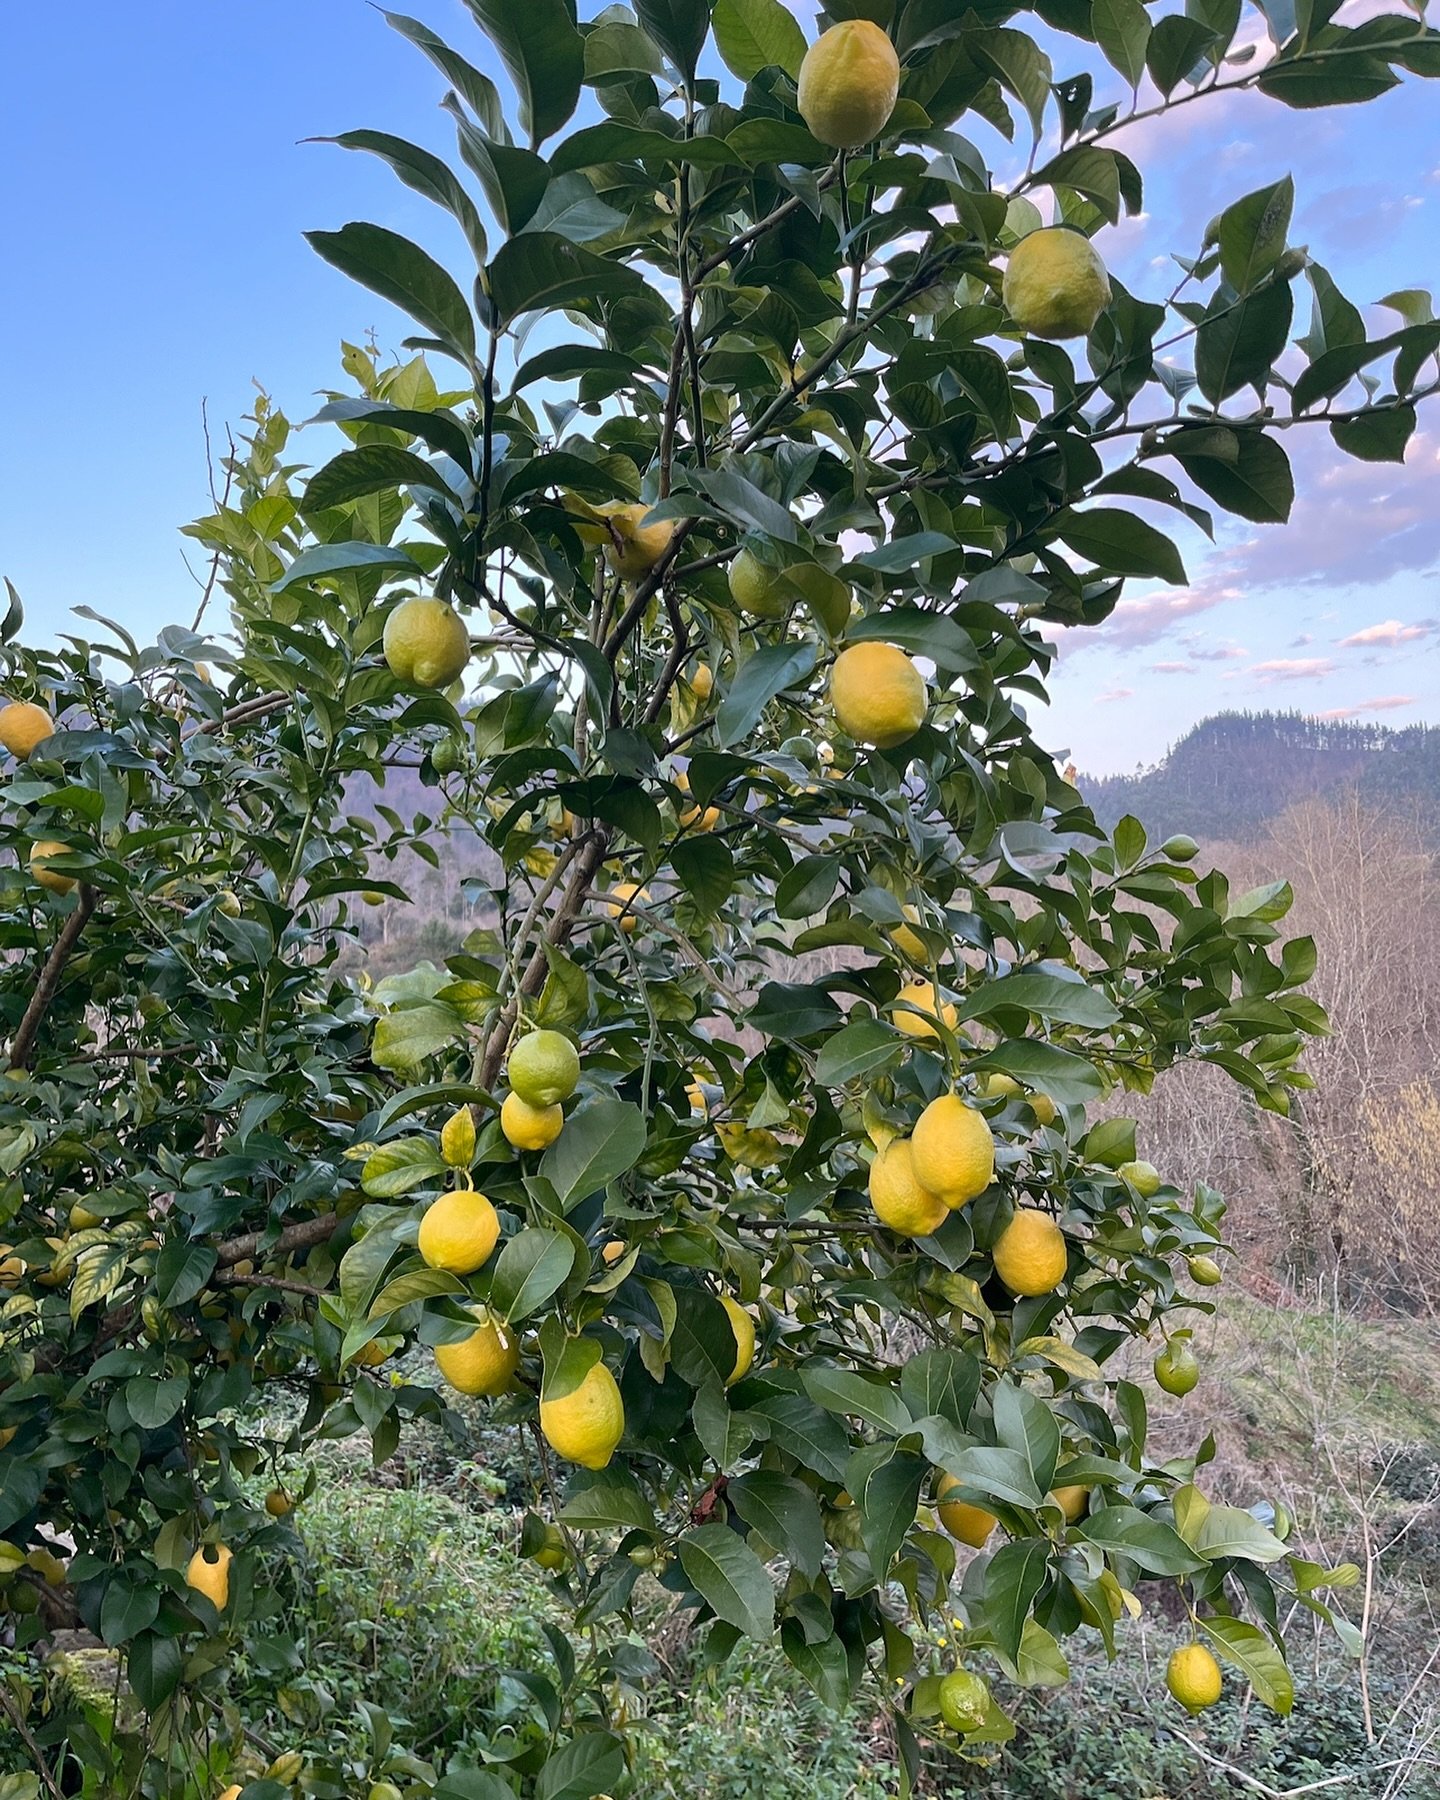 Magic lemon tree ✨ as I am travelling through the Spanish countryside. We know all the benefits of this citrus&hellip;
It contains a high amount of vitamine c, can help with digestive health, support heart health. With its delicious taste lemons are 